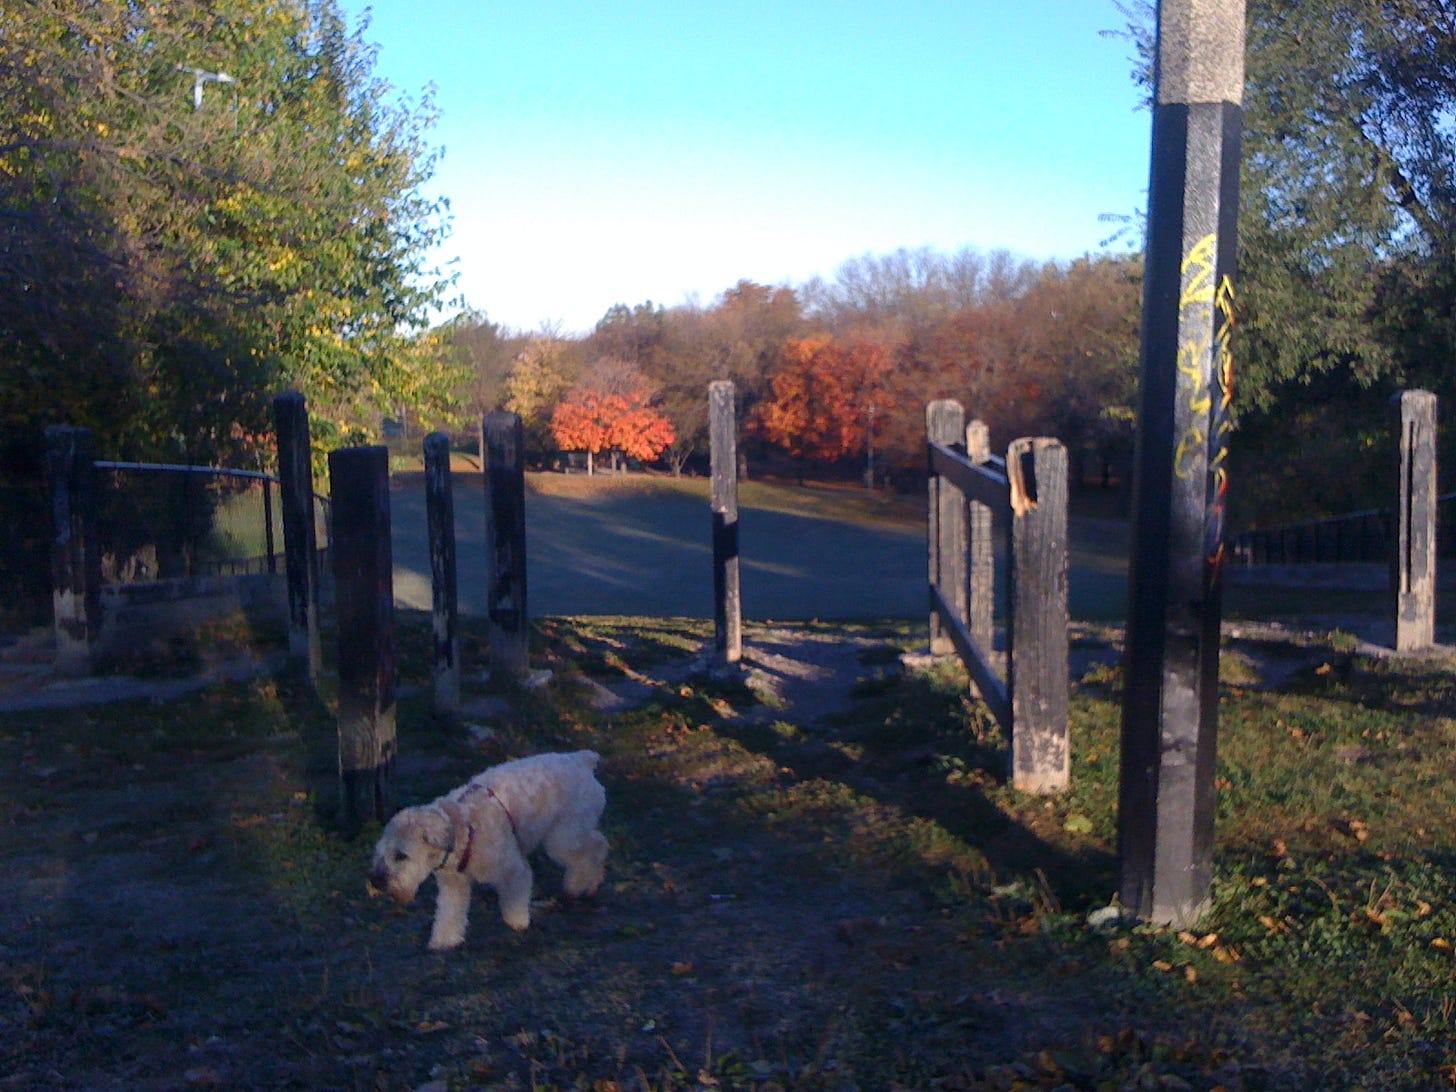 A soft-coated wheaten terrier walks between wooden starting gates at the top of a sledding hill in a wide park, with autumn-colored trees in the far background.